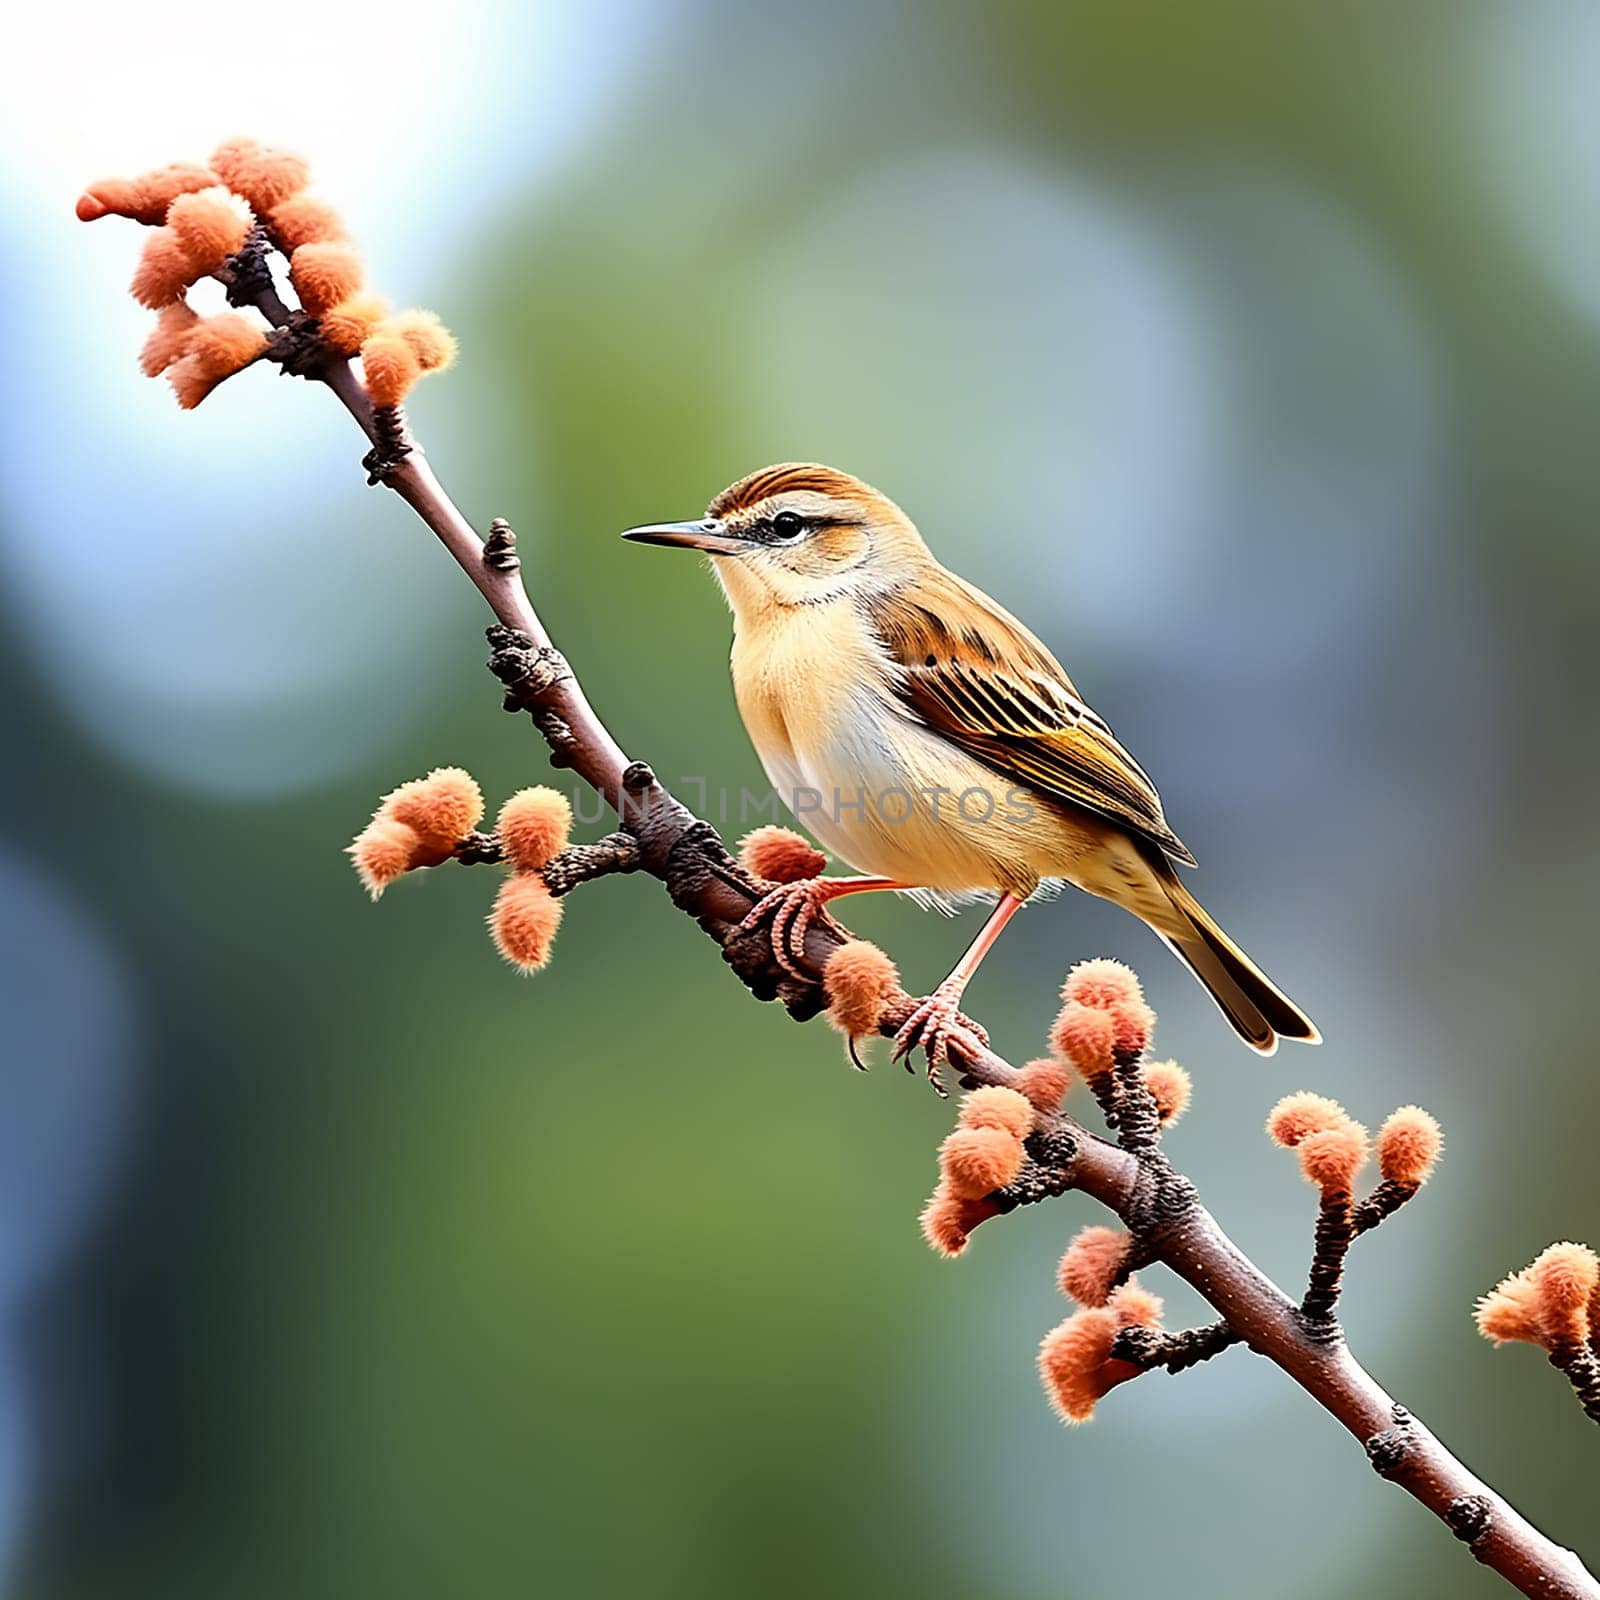 The Vibrant Zitting Cisticola Bird on a Branch by Petrichor